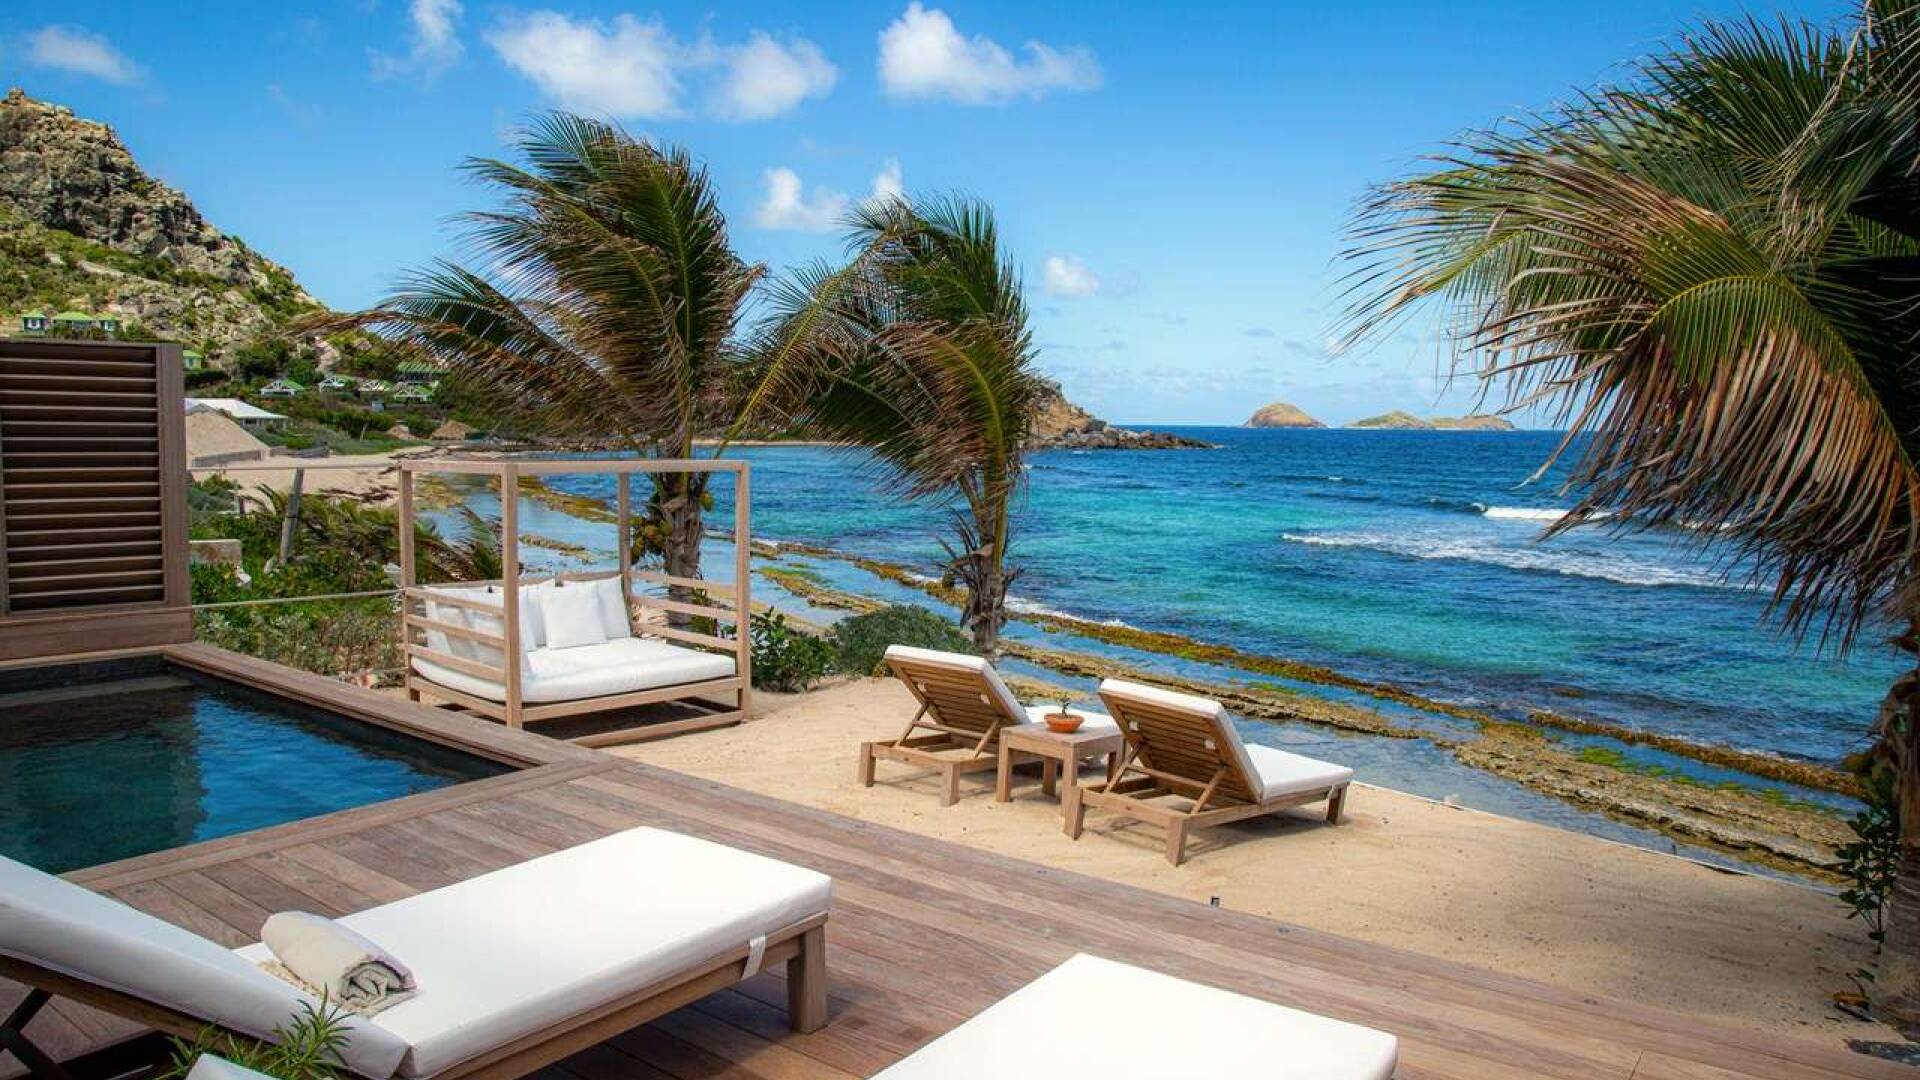 Deck at WV ACF, Anse des Cayes, St. Barthelemy